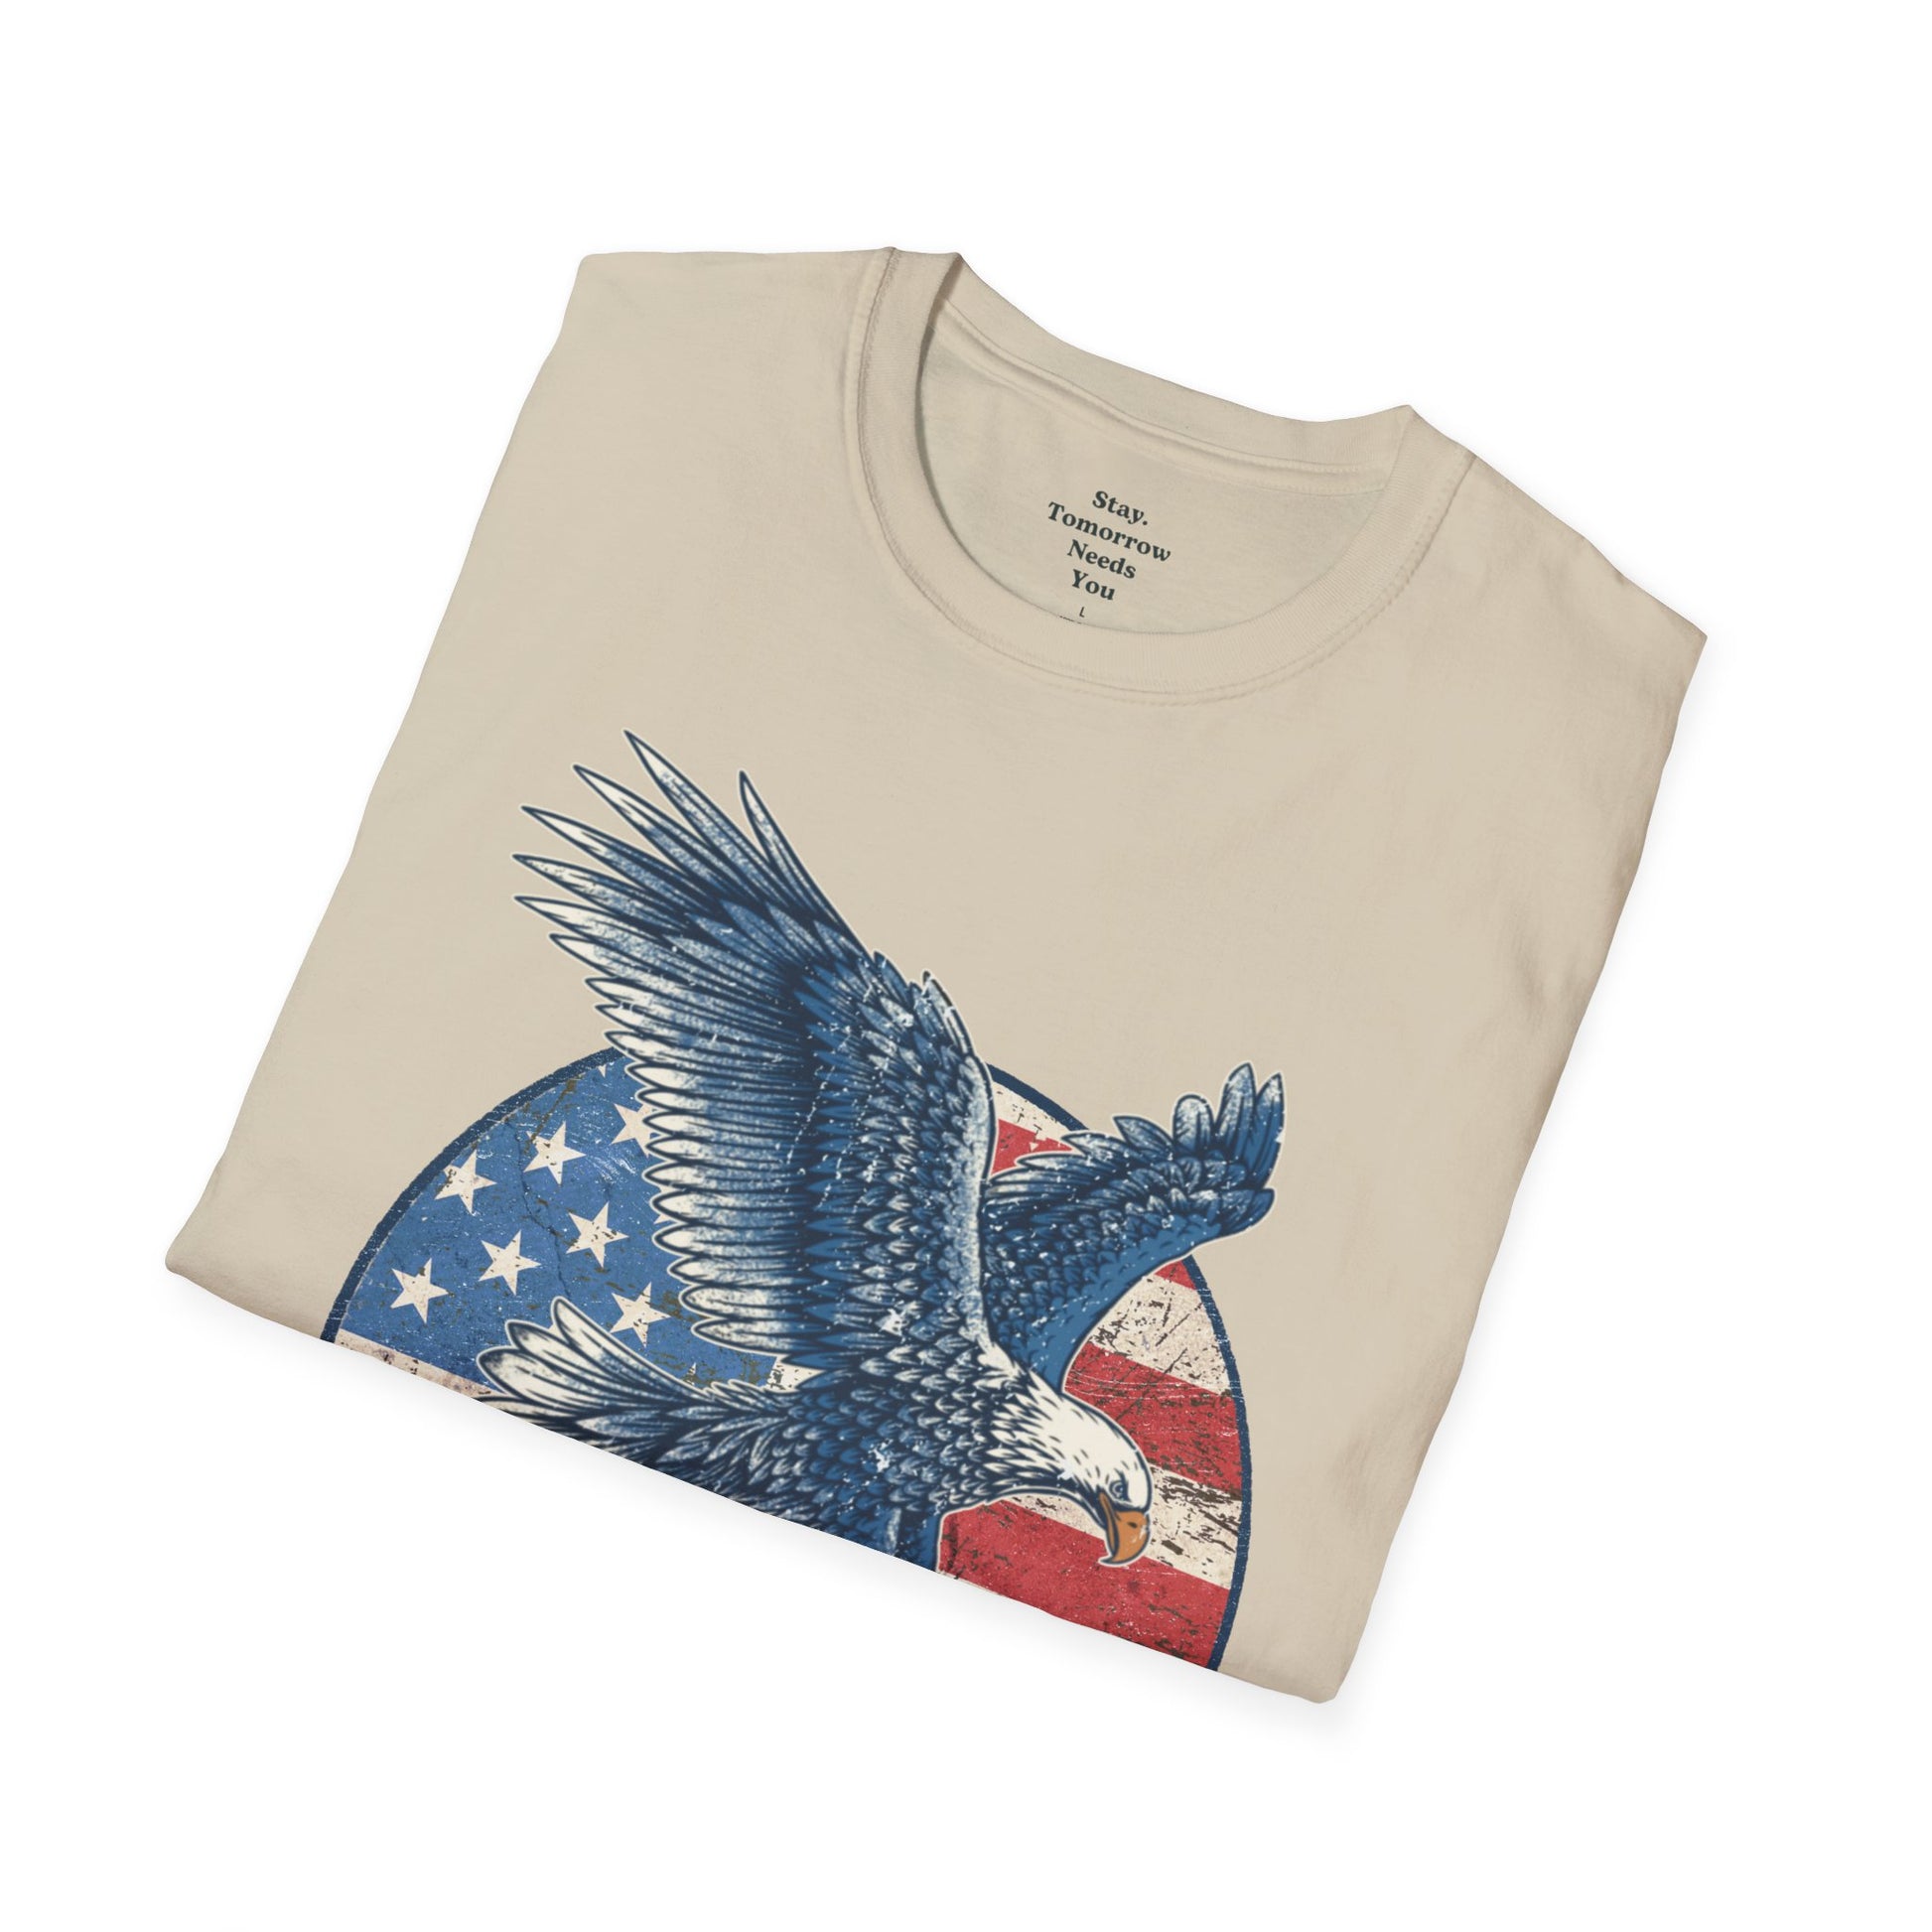 Retro 4th of July T shirt 2024 Distressed American Flag Eagle 1776 Made in America Vintage Patriotic America Freedom Fourth of July Independence Day T shirt - Stay Tomorrow Needs You Retro 4th of July T shirt 2024 Distressed American Flag Eagle 1776 Made in America Vintage Patriotic America Freedom Fourth of July Independence Day T shirt